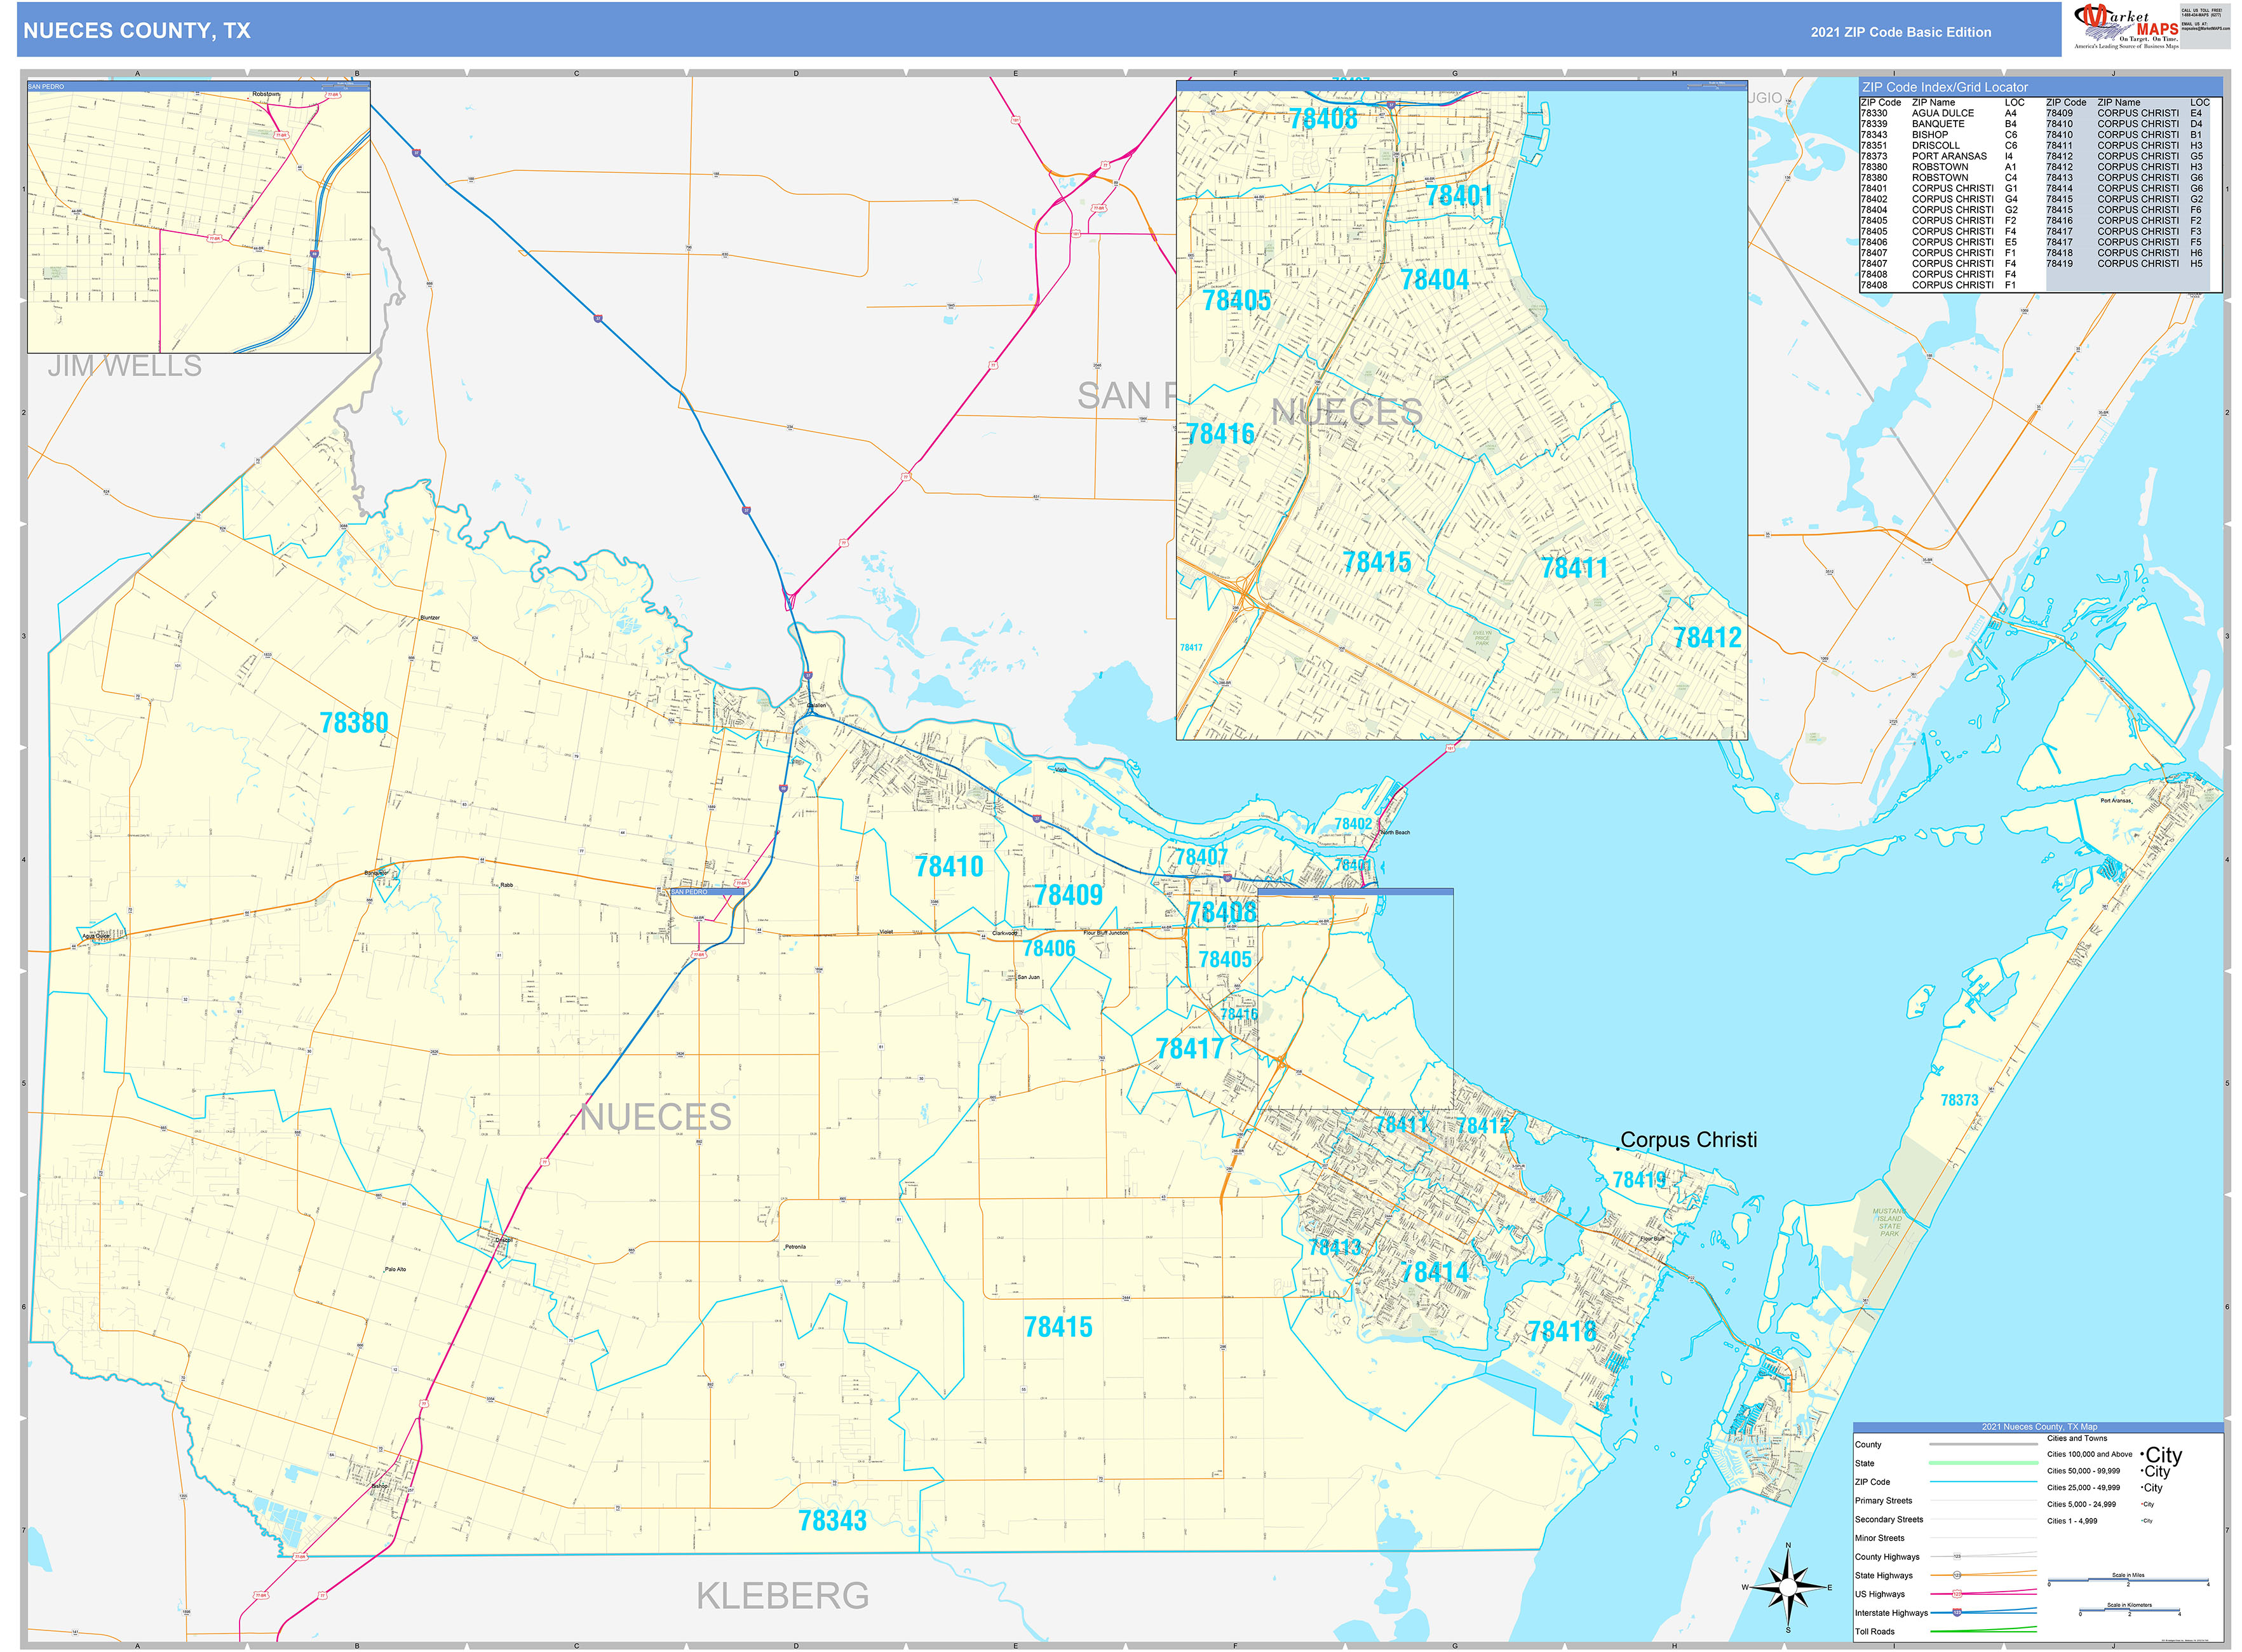 Nueces County, TX Zip Code Wall Map Basic Style by MarketMAPS - MapSales